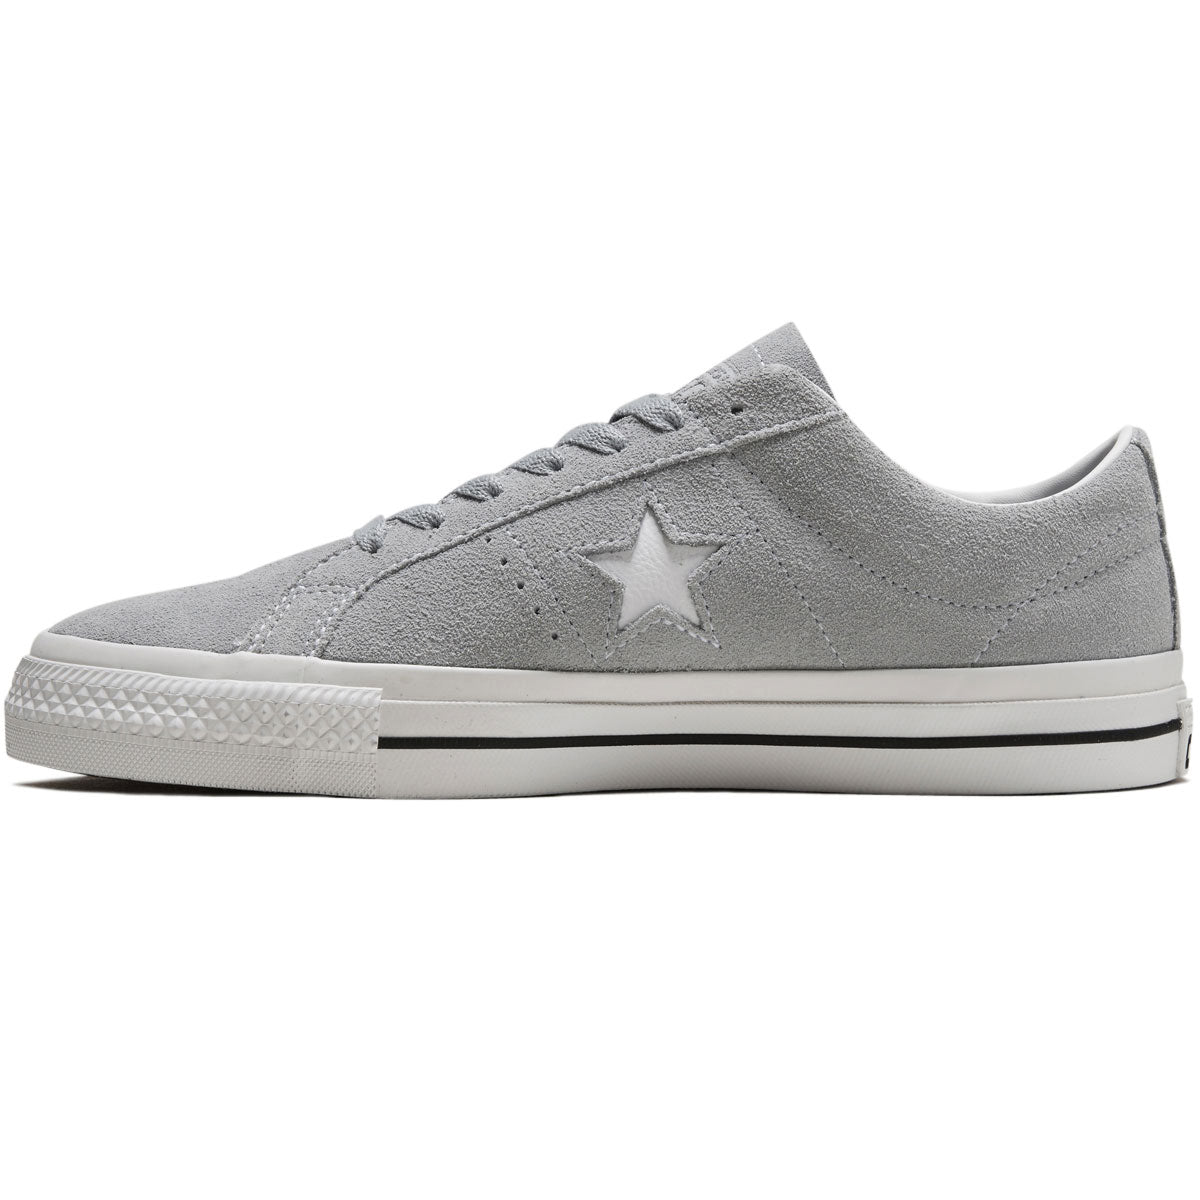 Converse One Star Pro Shoes - Wolf Grey/White/Black – CCS